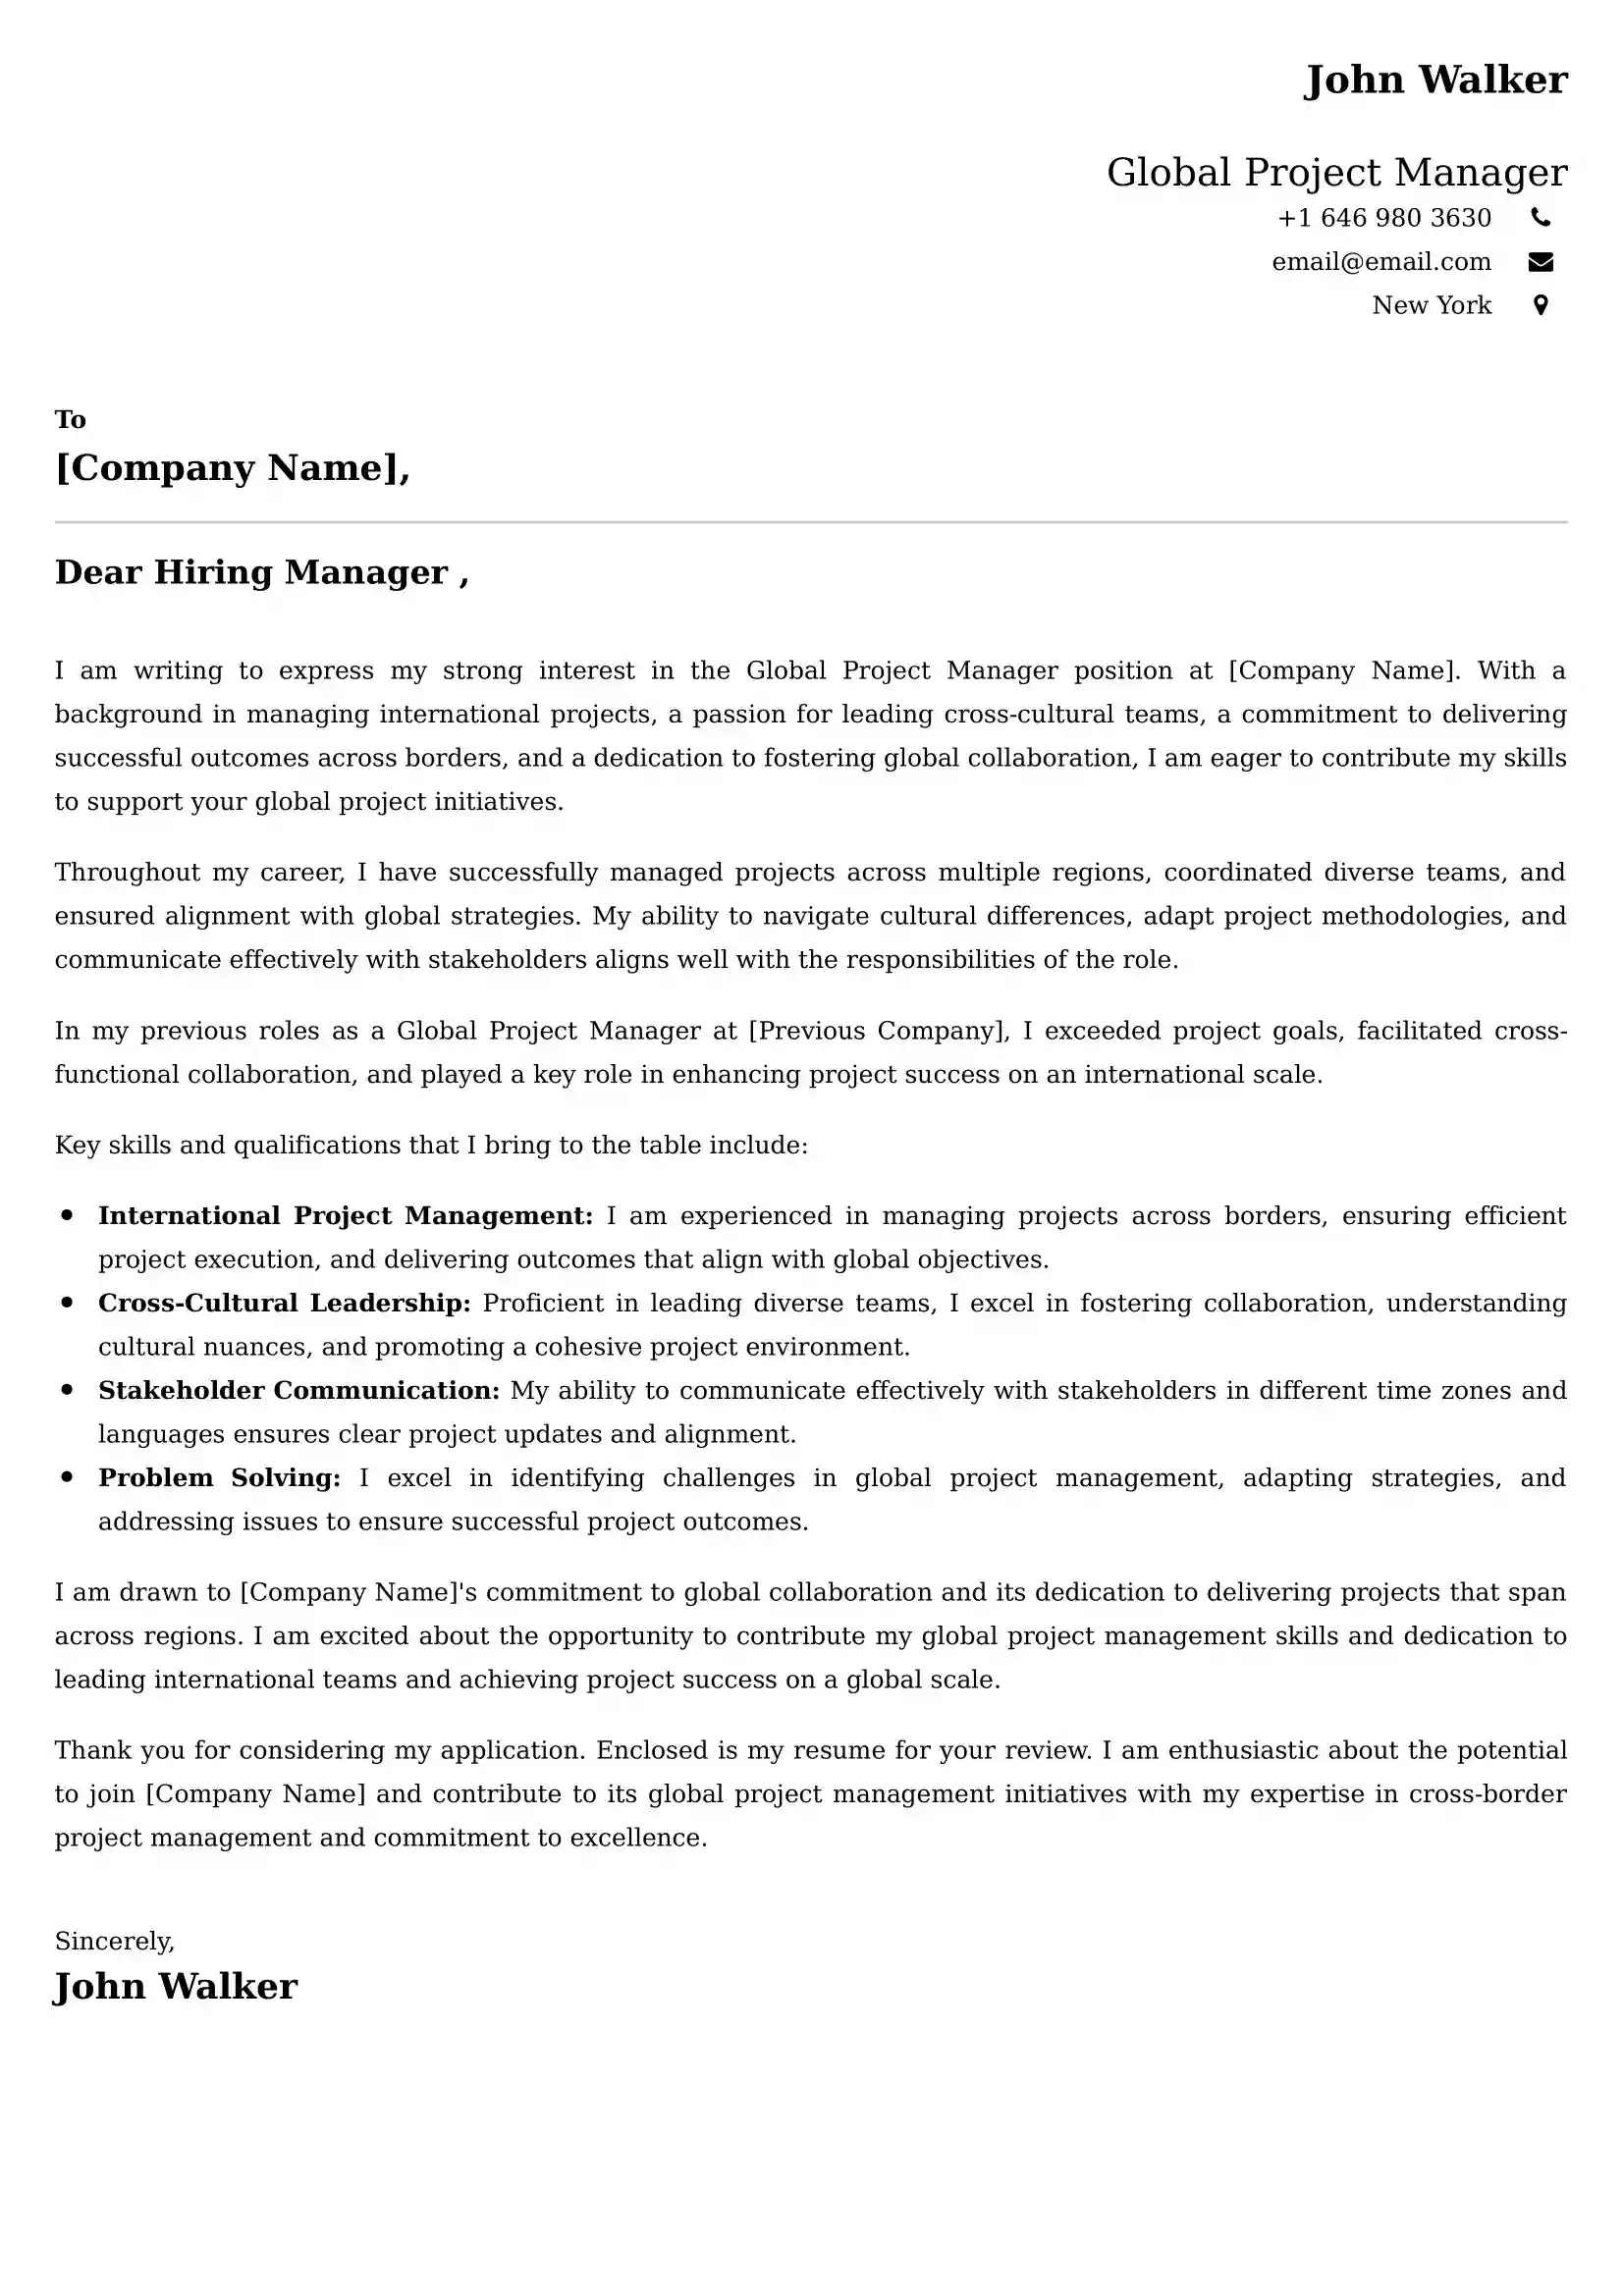 Global Project Manager Cover Letter Examples - Latest UK Format